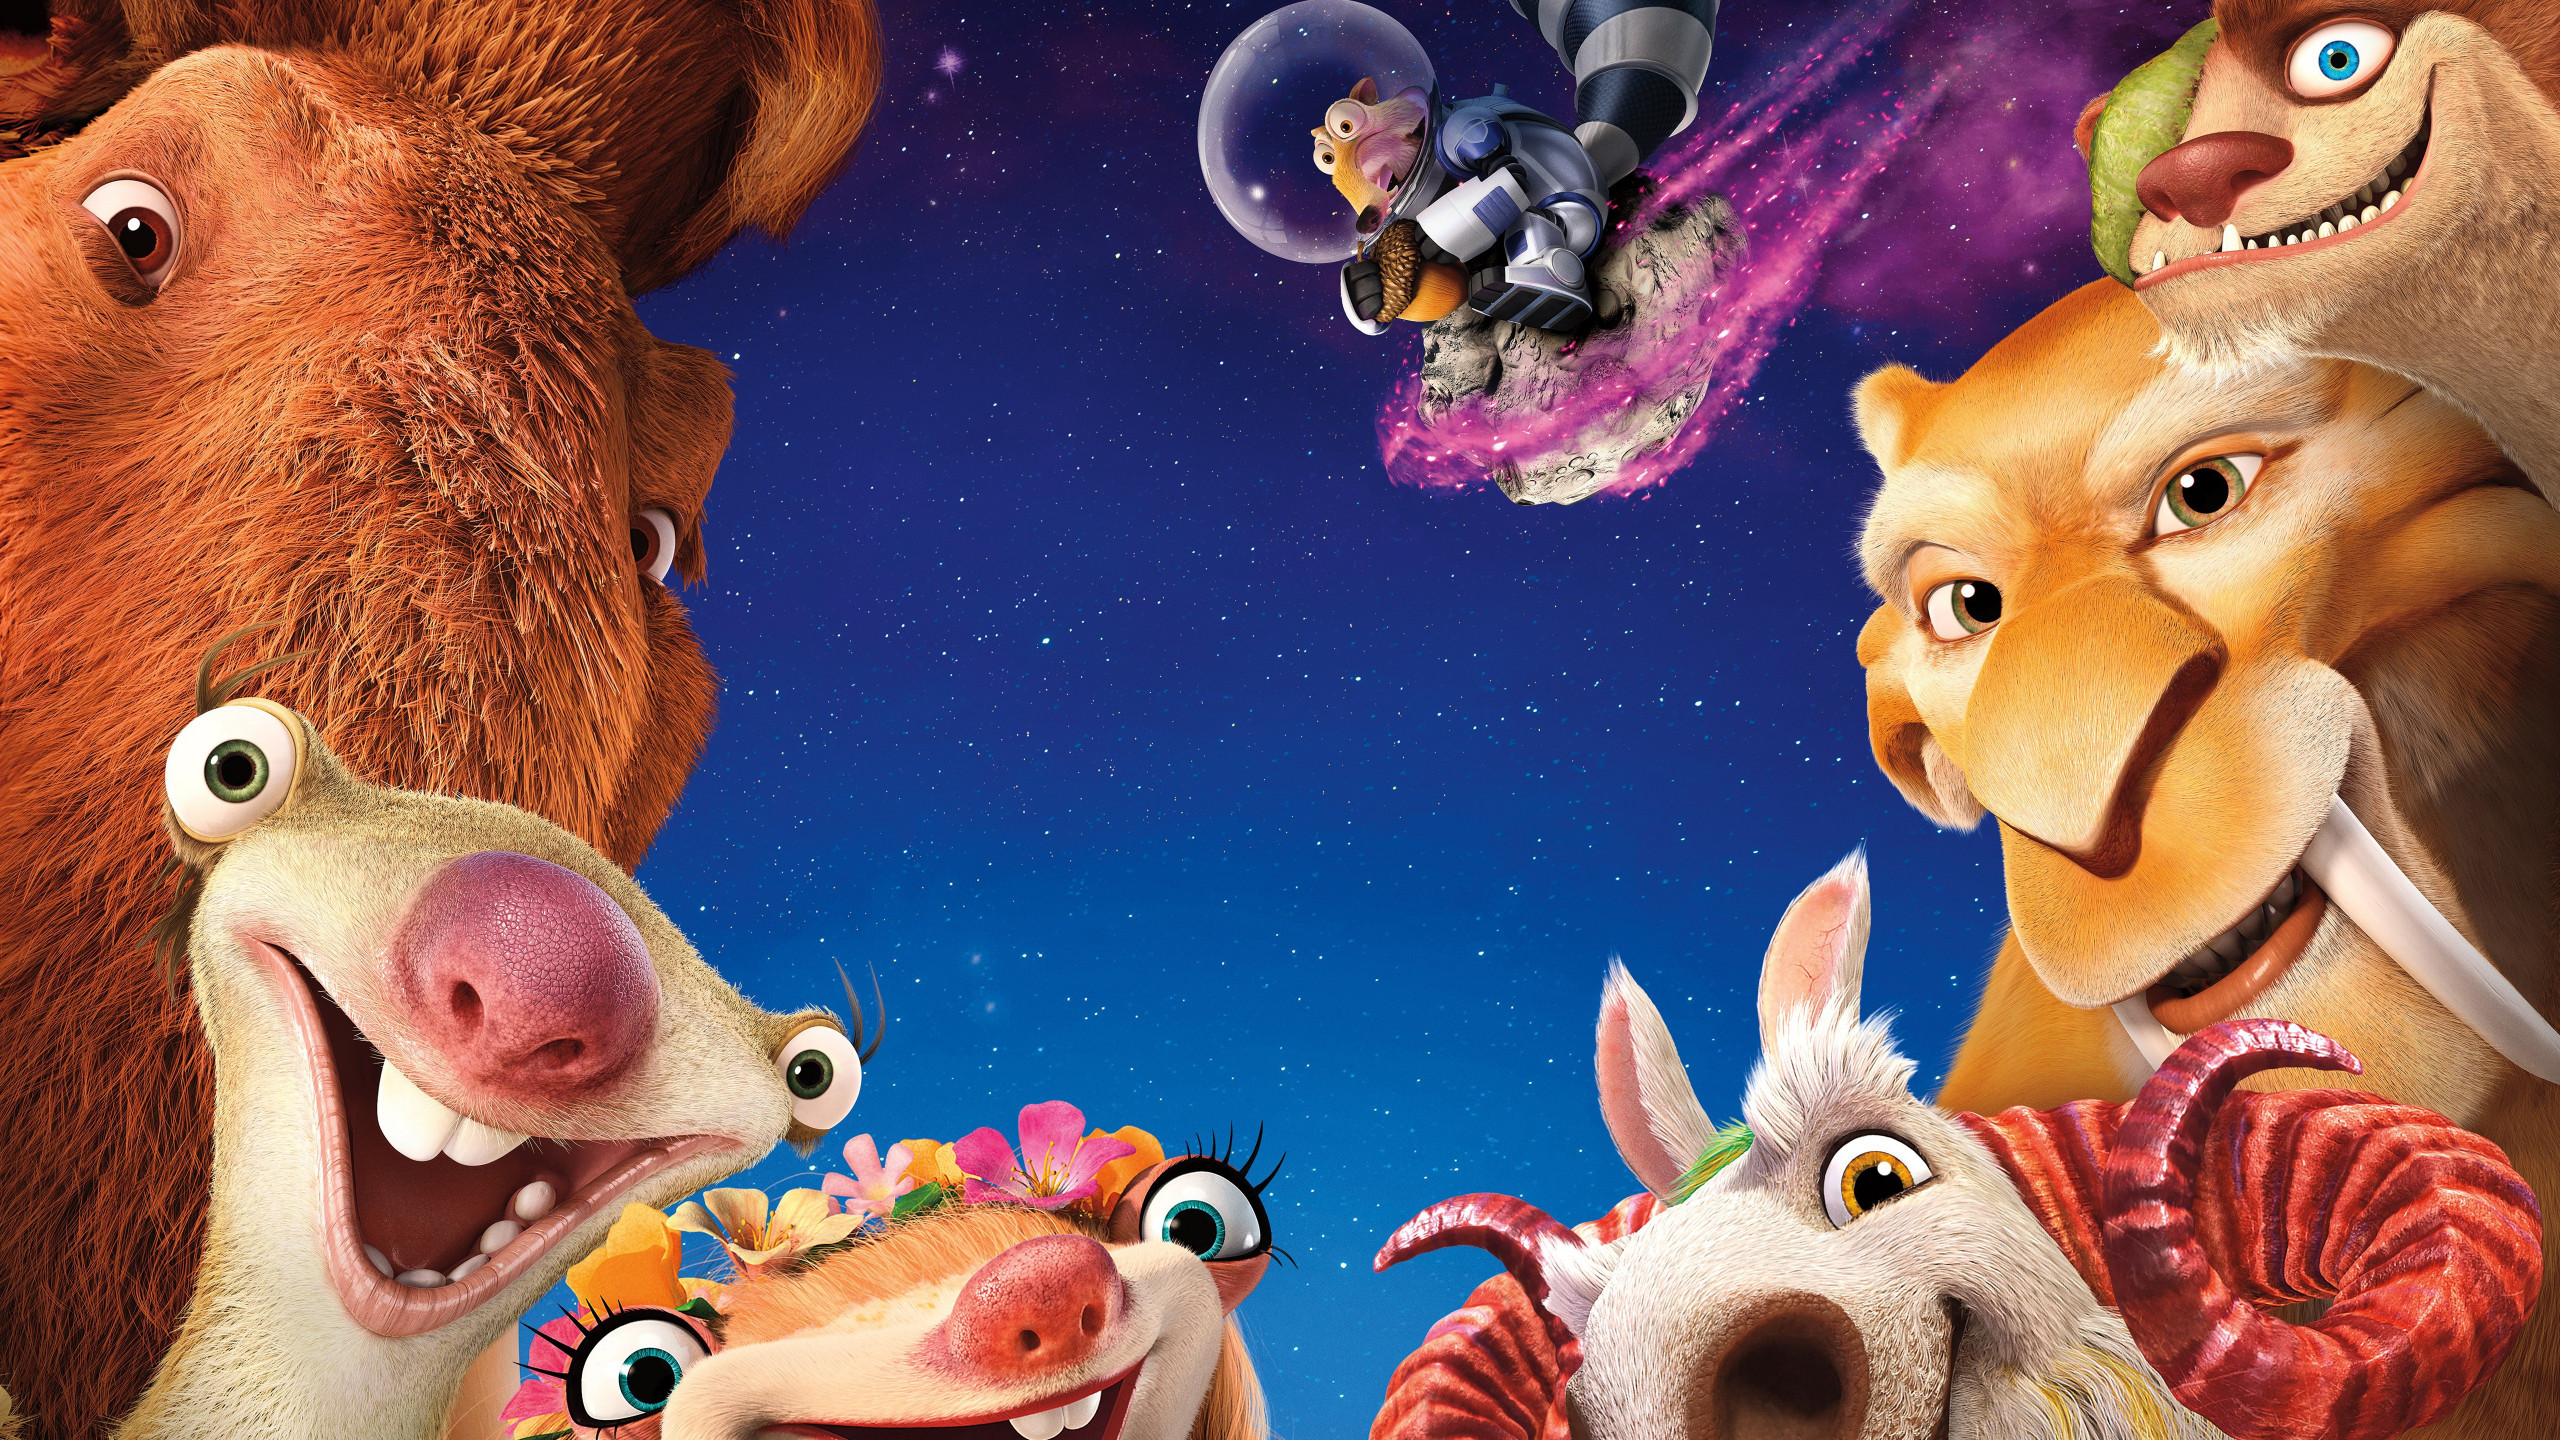 Wallpaper Ice Age 5: Collision Course, diego, manny, scrat, sid